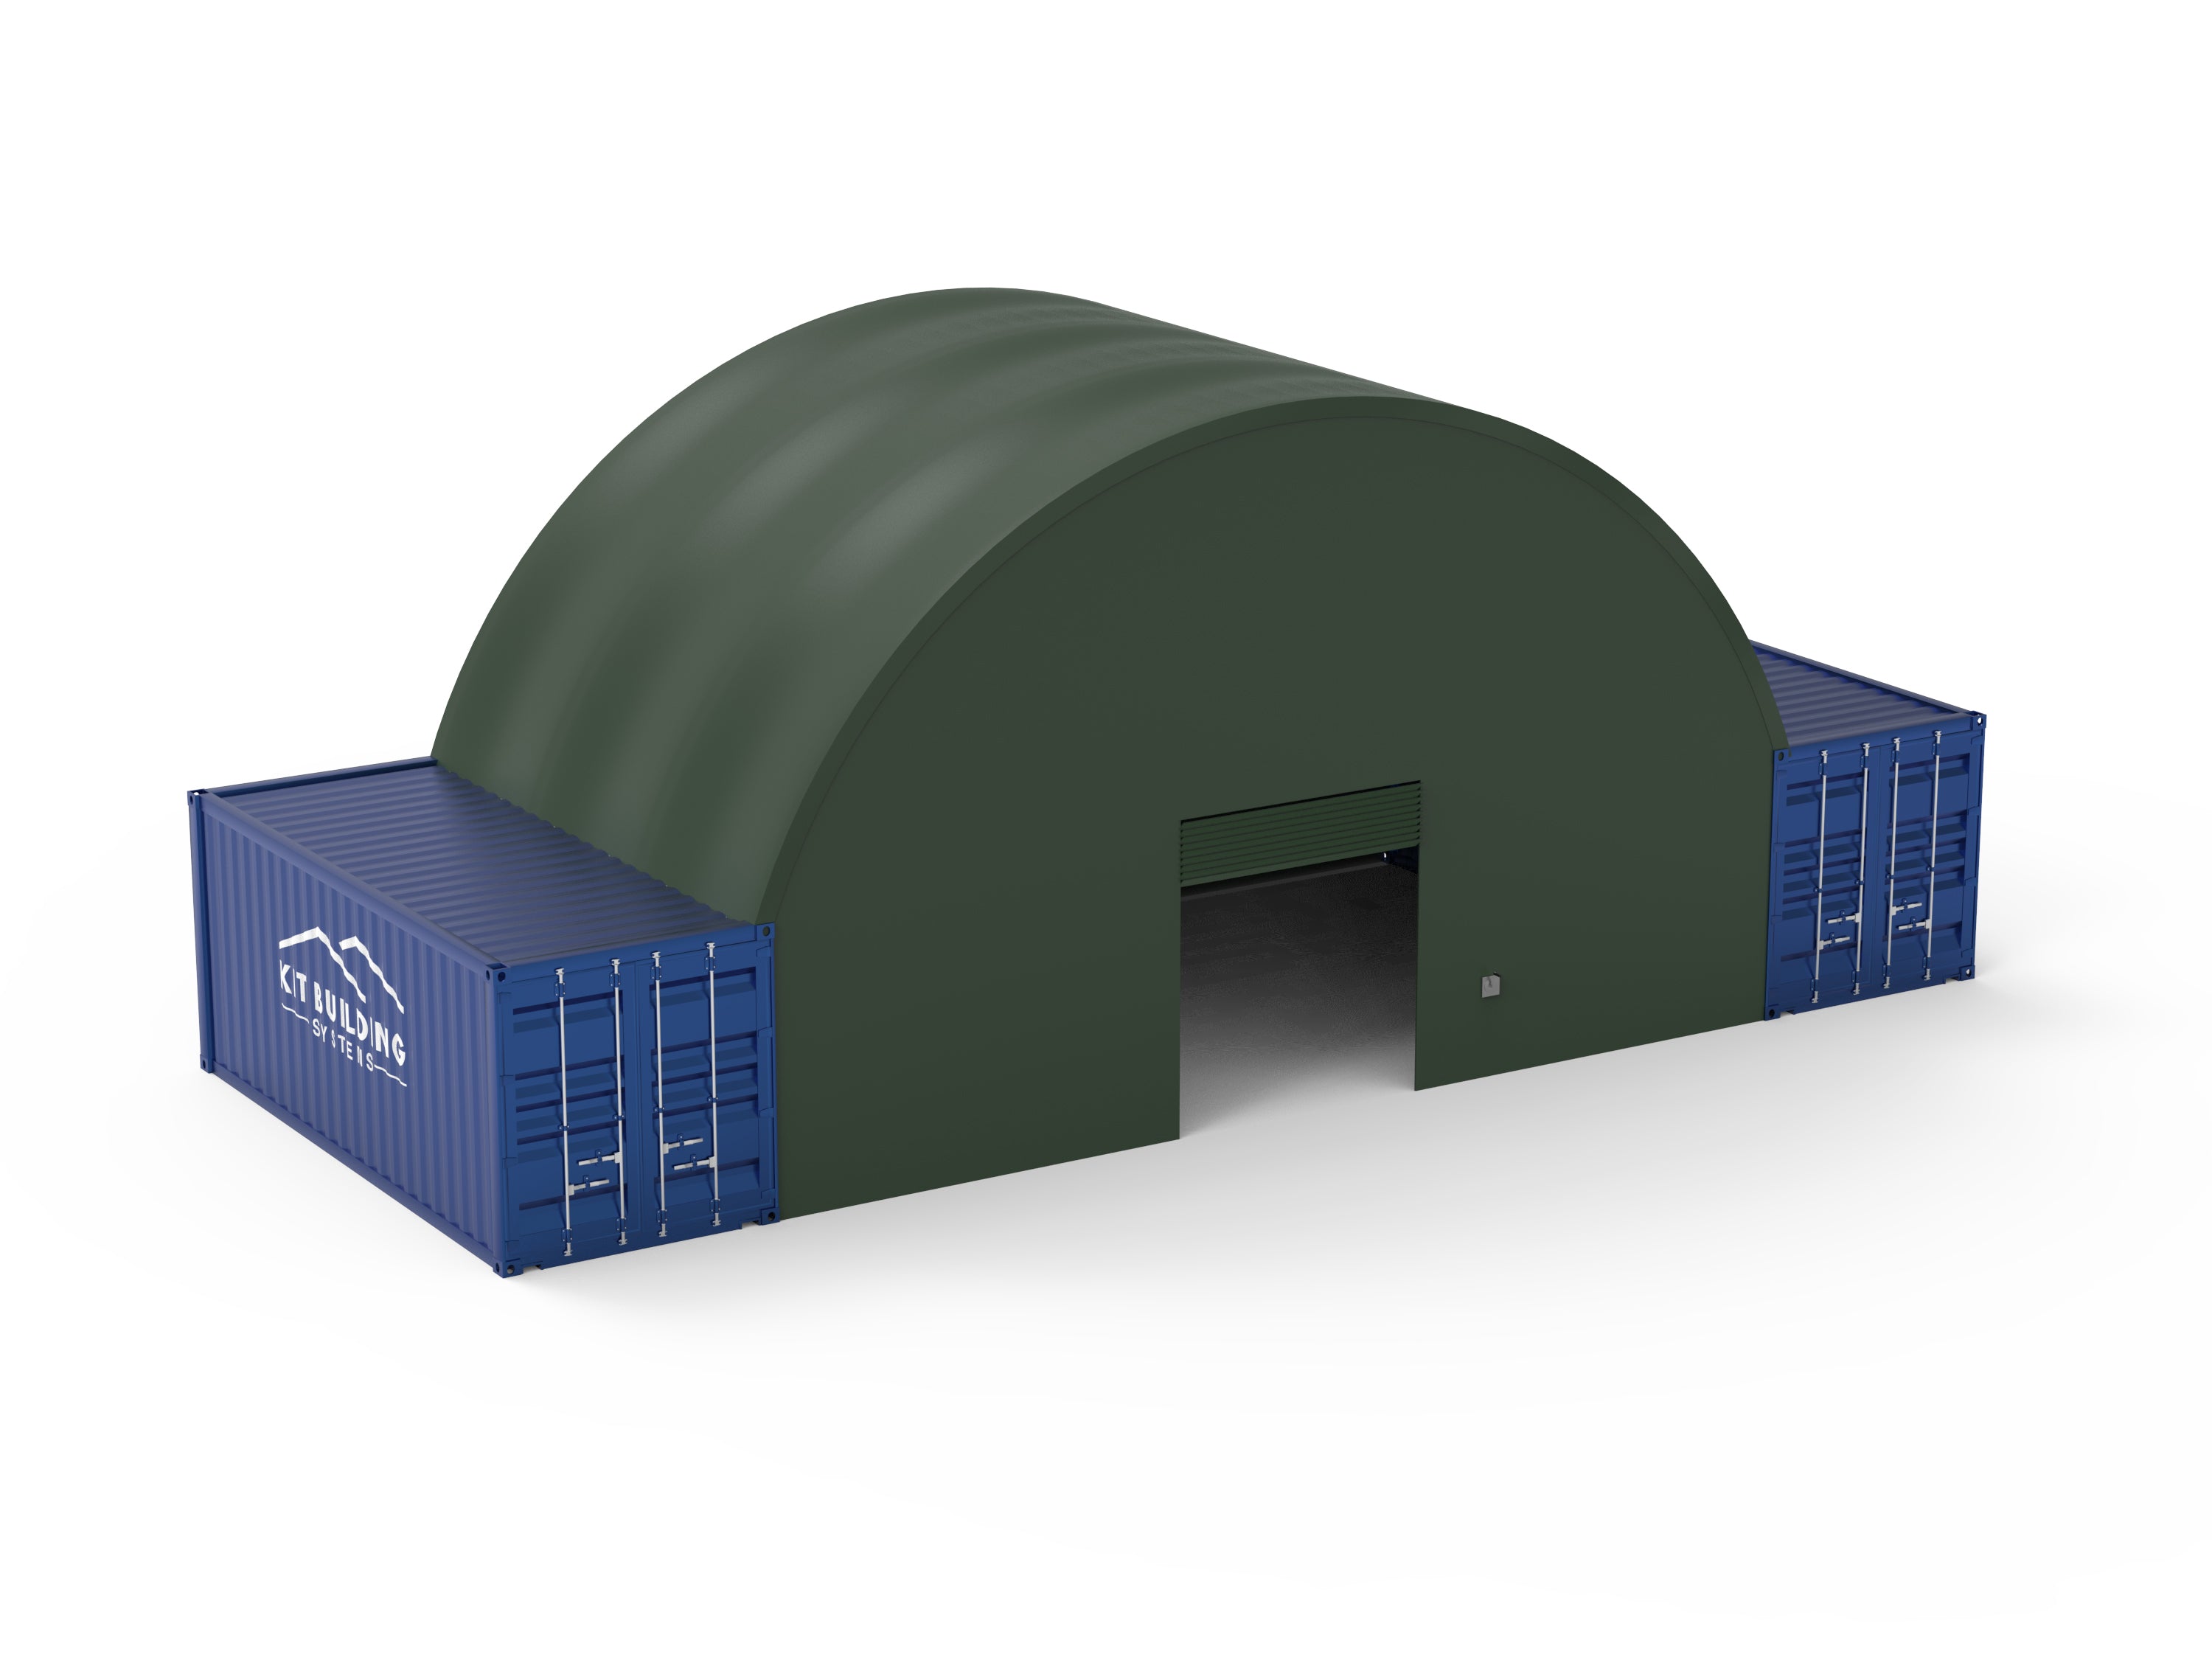 10m x 6m- Single Truss Container canopy - Closed back panel and front panel with winch door - Green